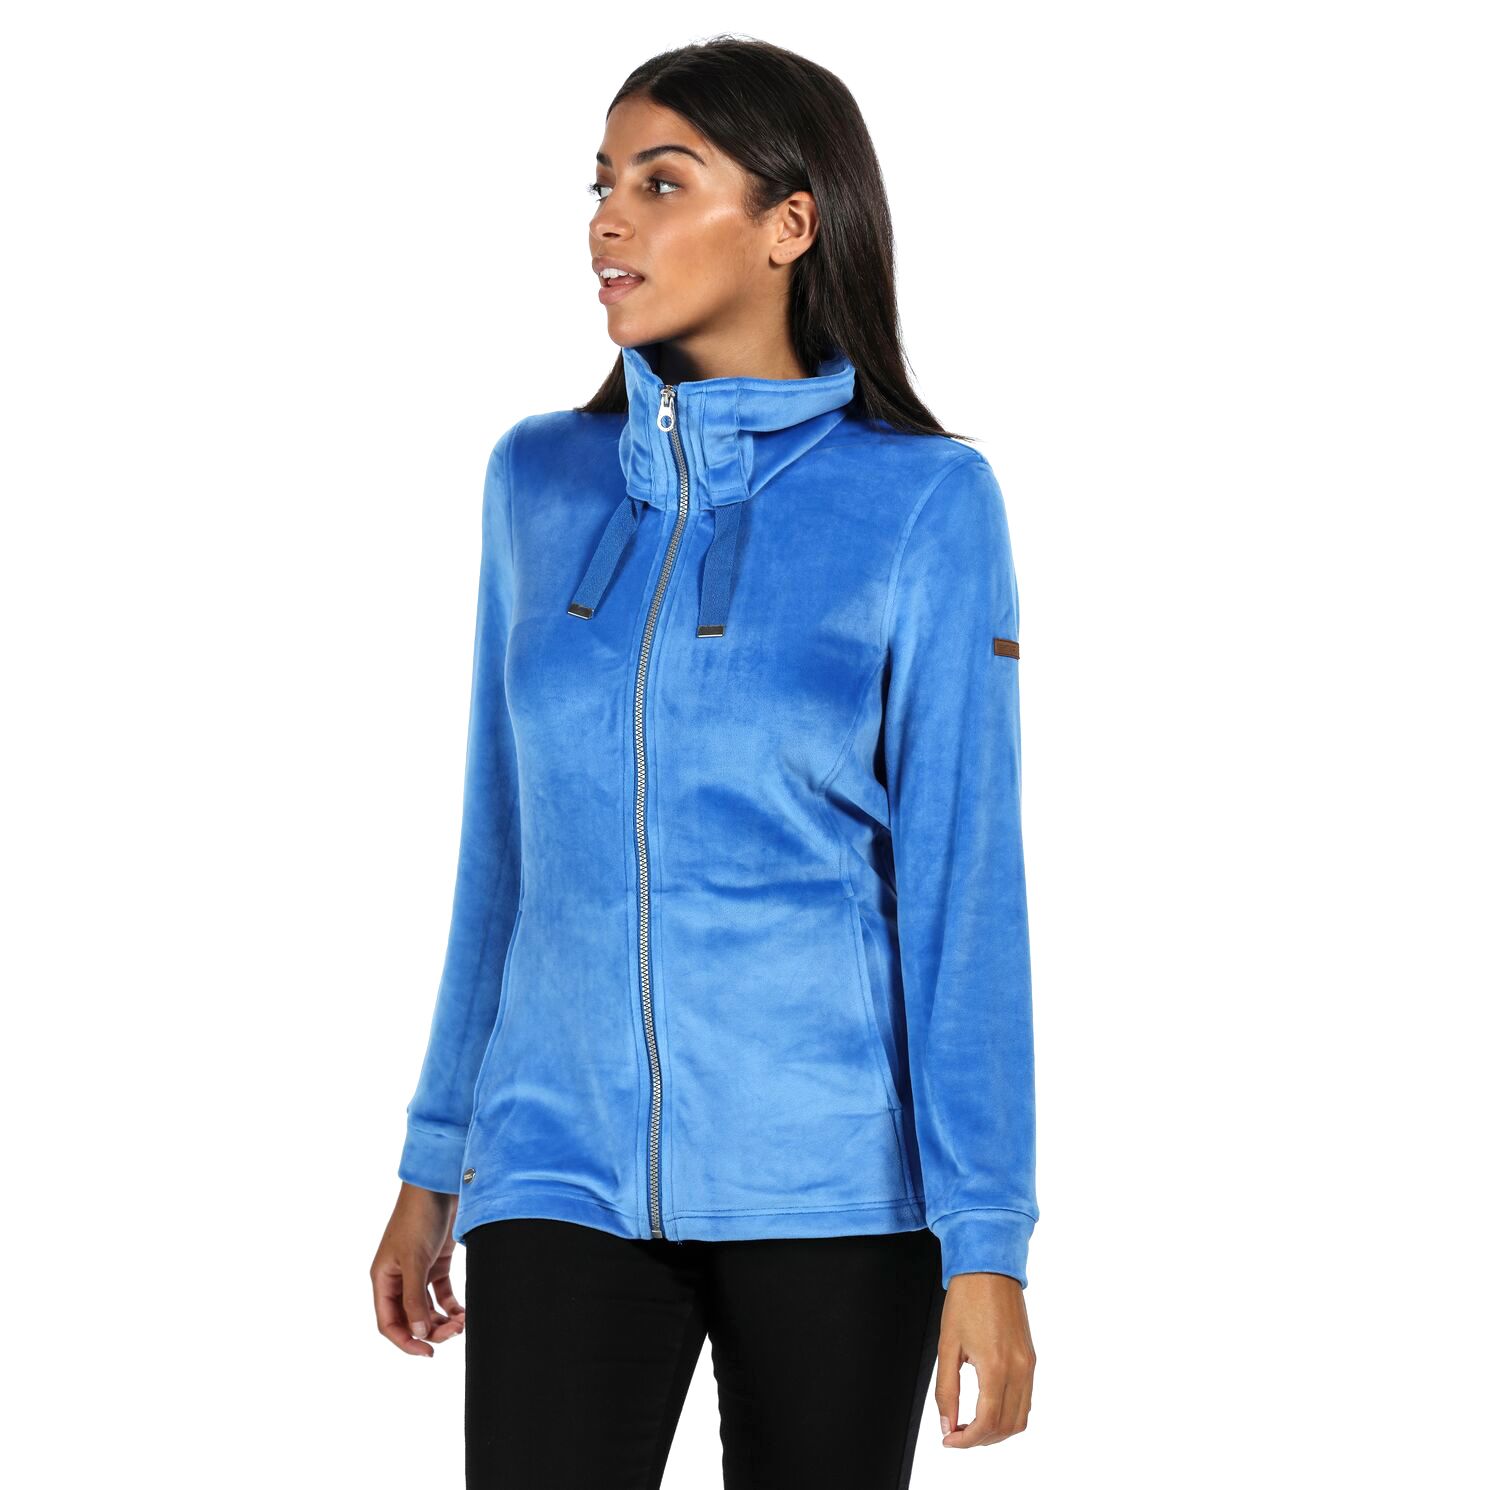 Material; Velour option: 94% polyester, 6% elastane, Non-velour: 63% Cotton, 37% Polyester. Oversized stand collar with adjustable drawcord. 2 lower pockets. Side vents with herringbone tape.